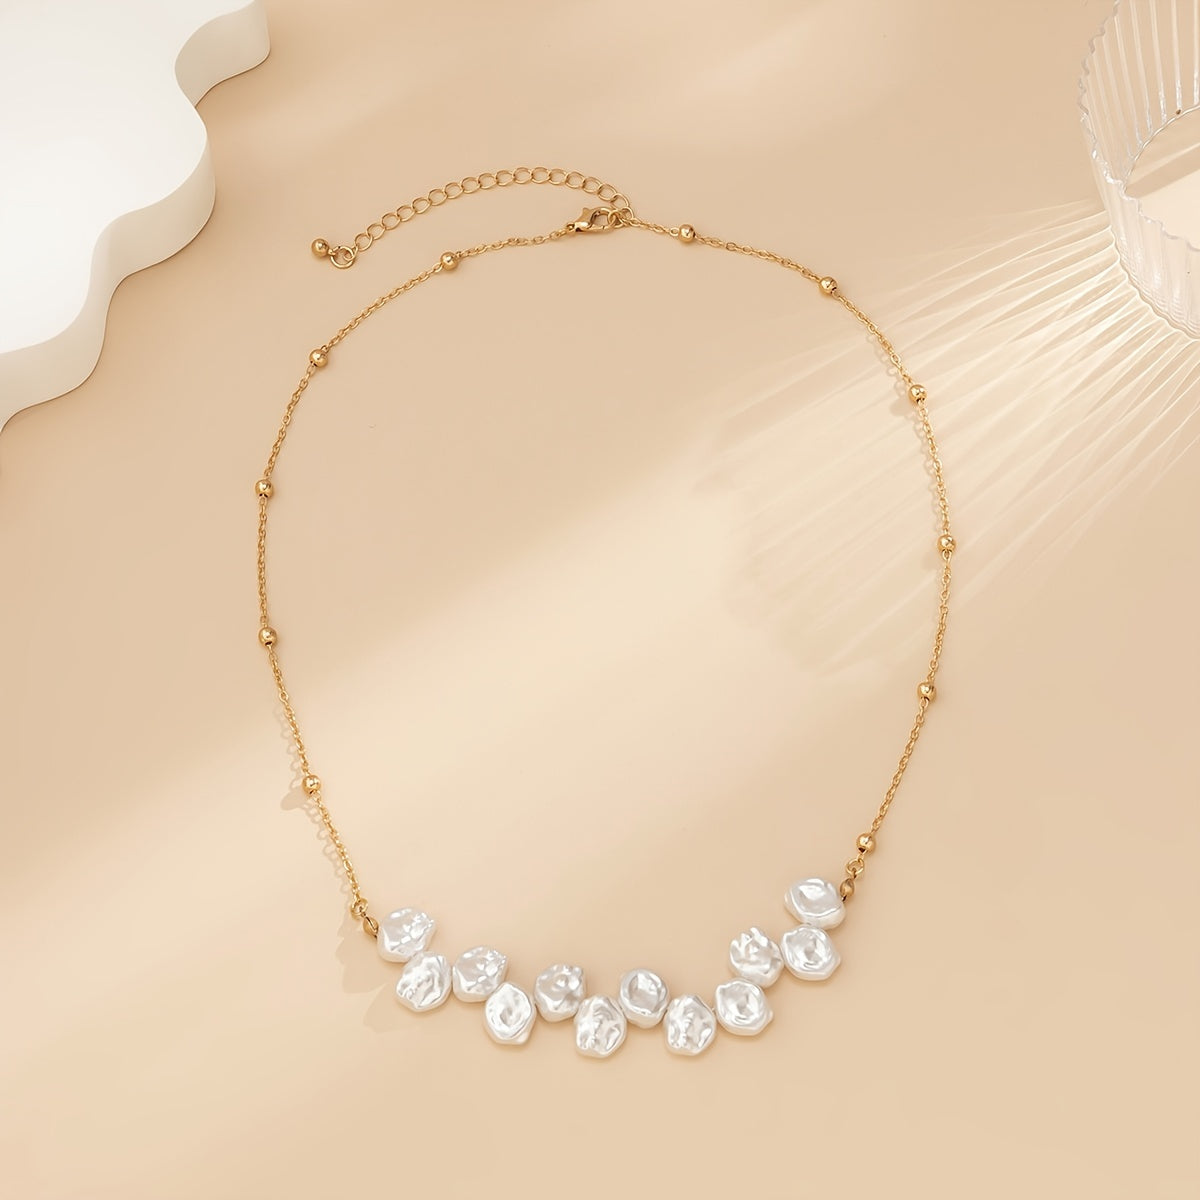 Gorgeous Elegant Special-Shaped Pearl Necklace - Perfect for Any Occasion!